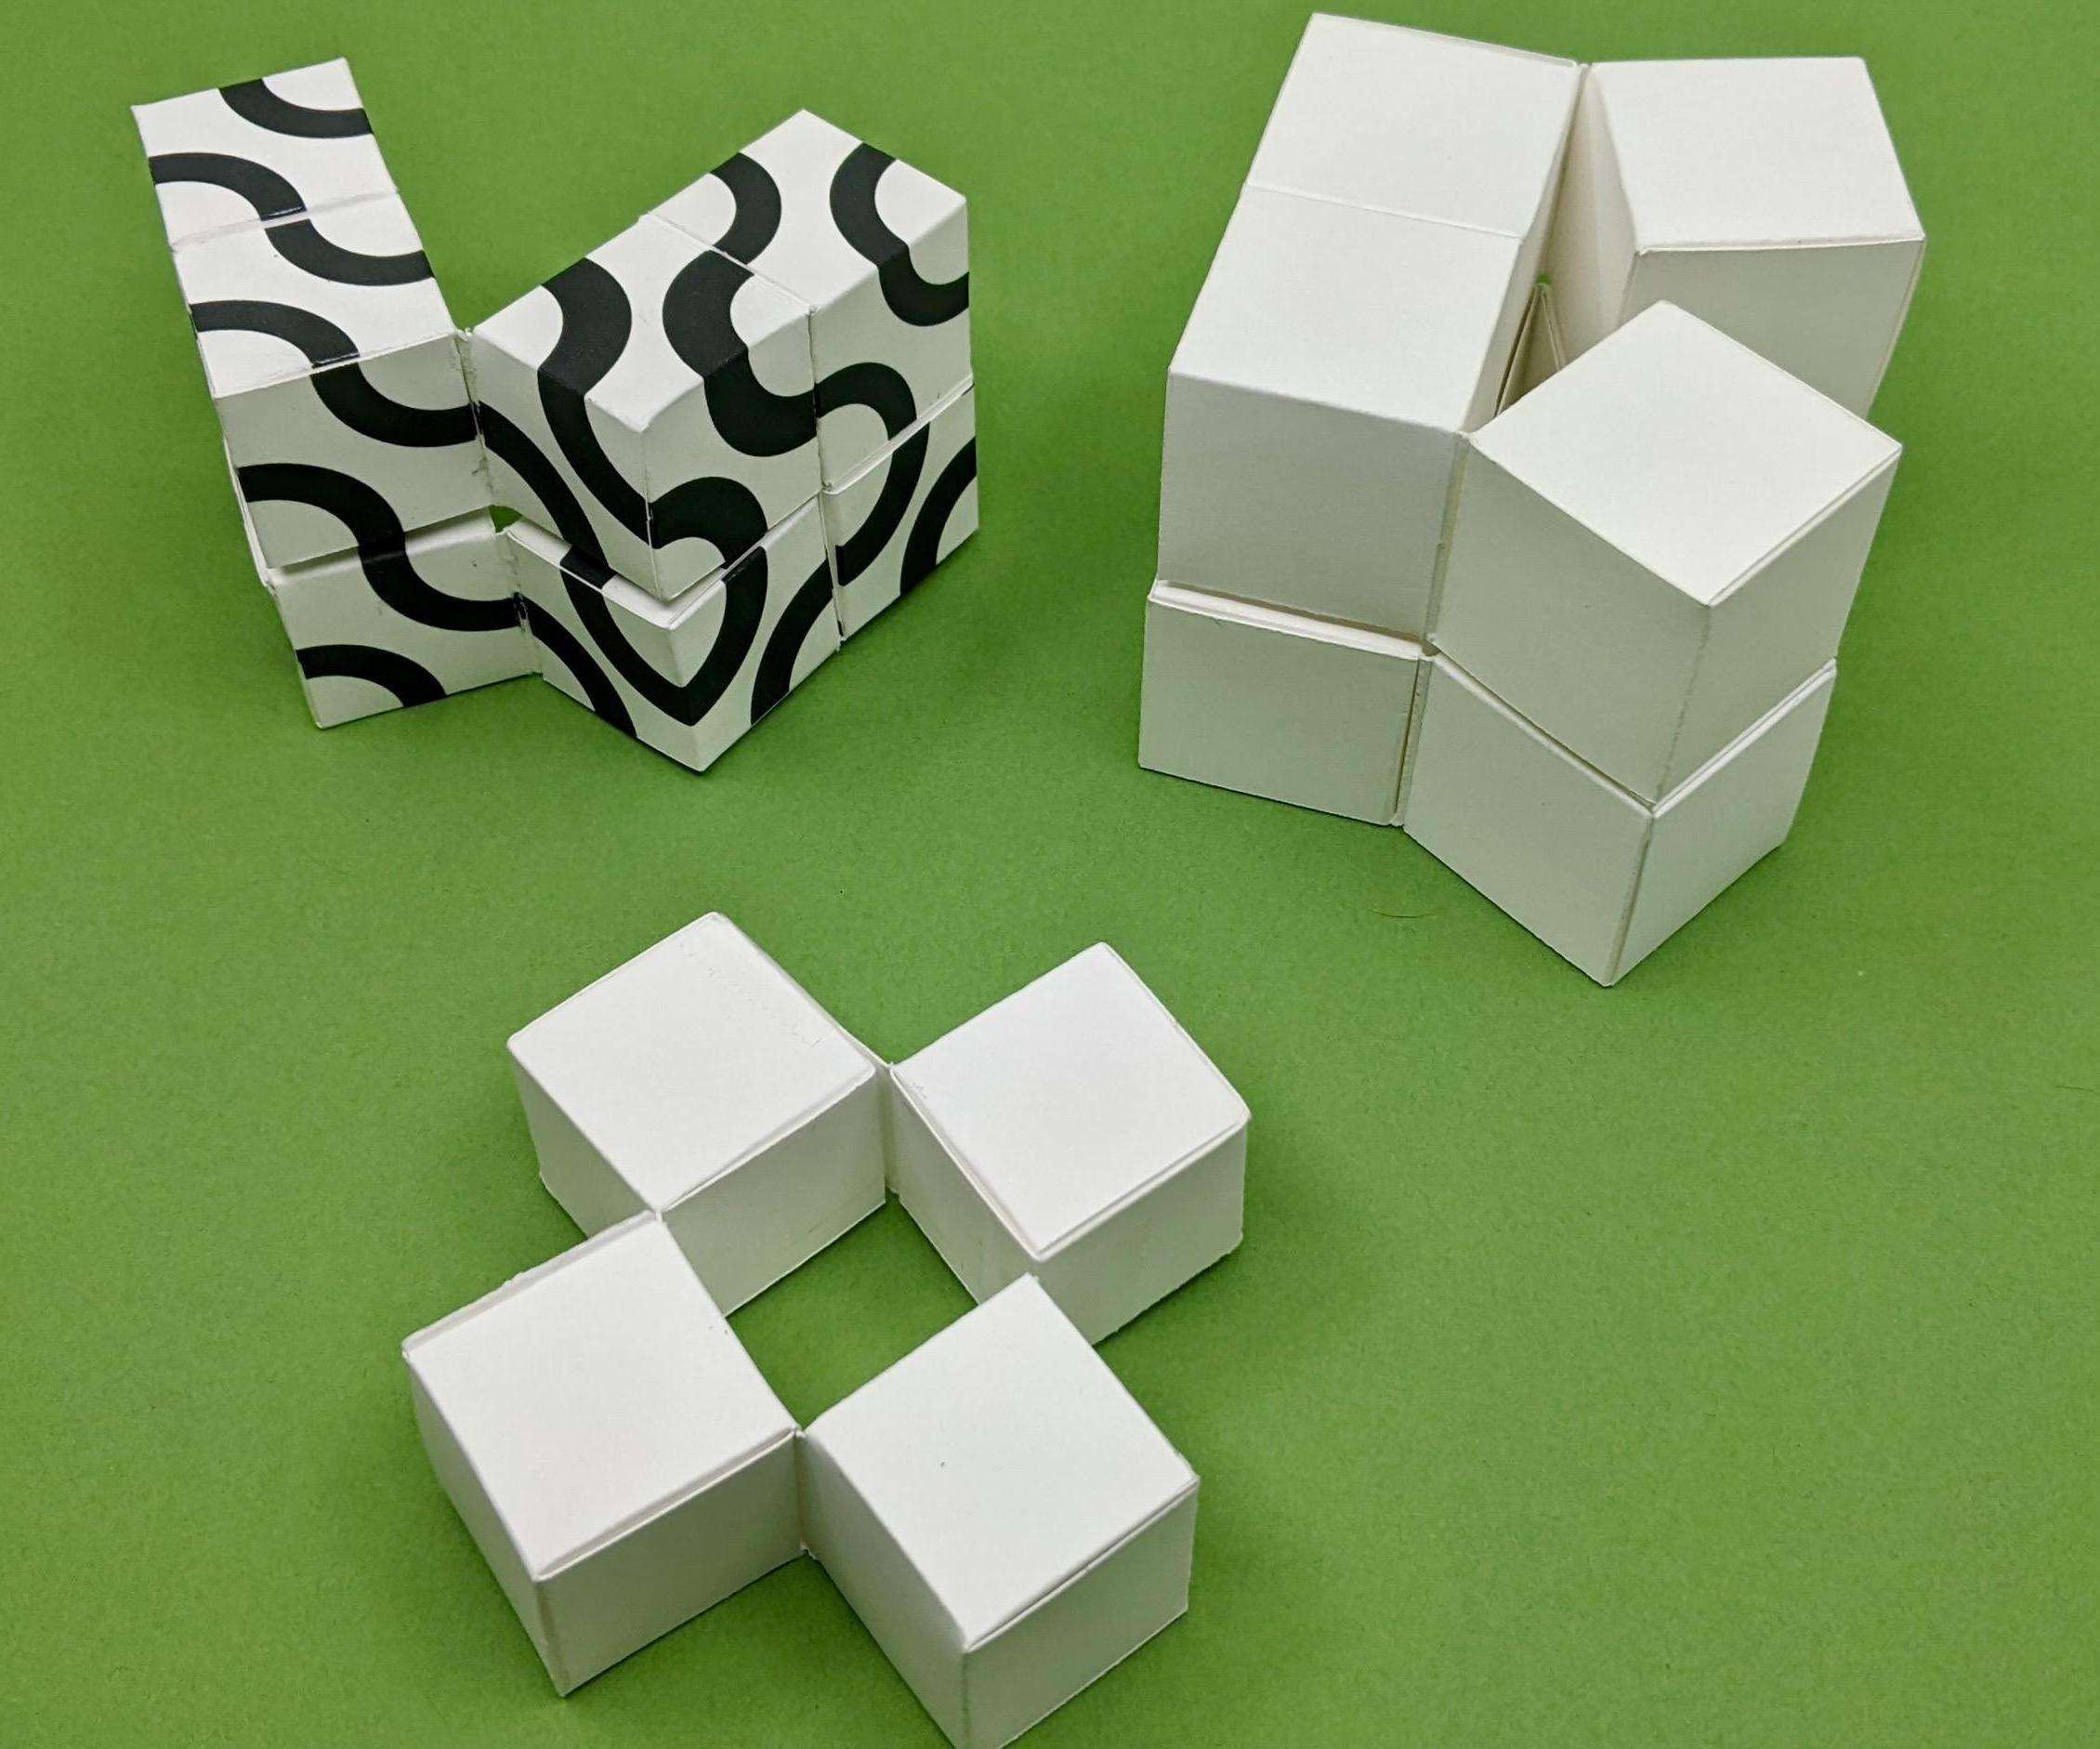 Making Paper Flexicubes (also Known As Infinity Cubes, Fidget Cubes or Magic Cubes)